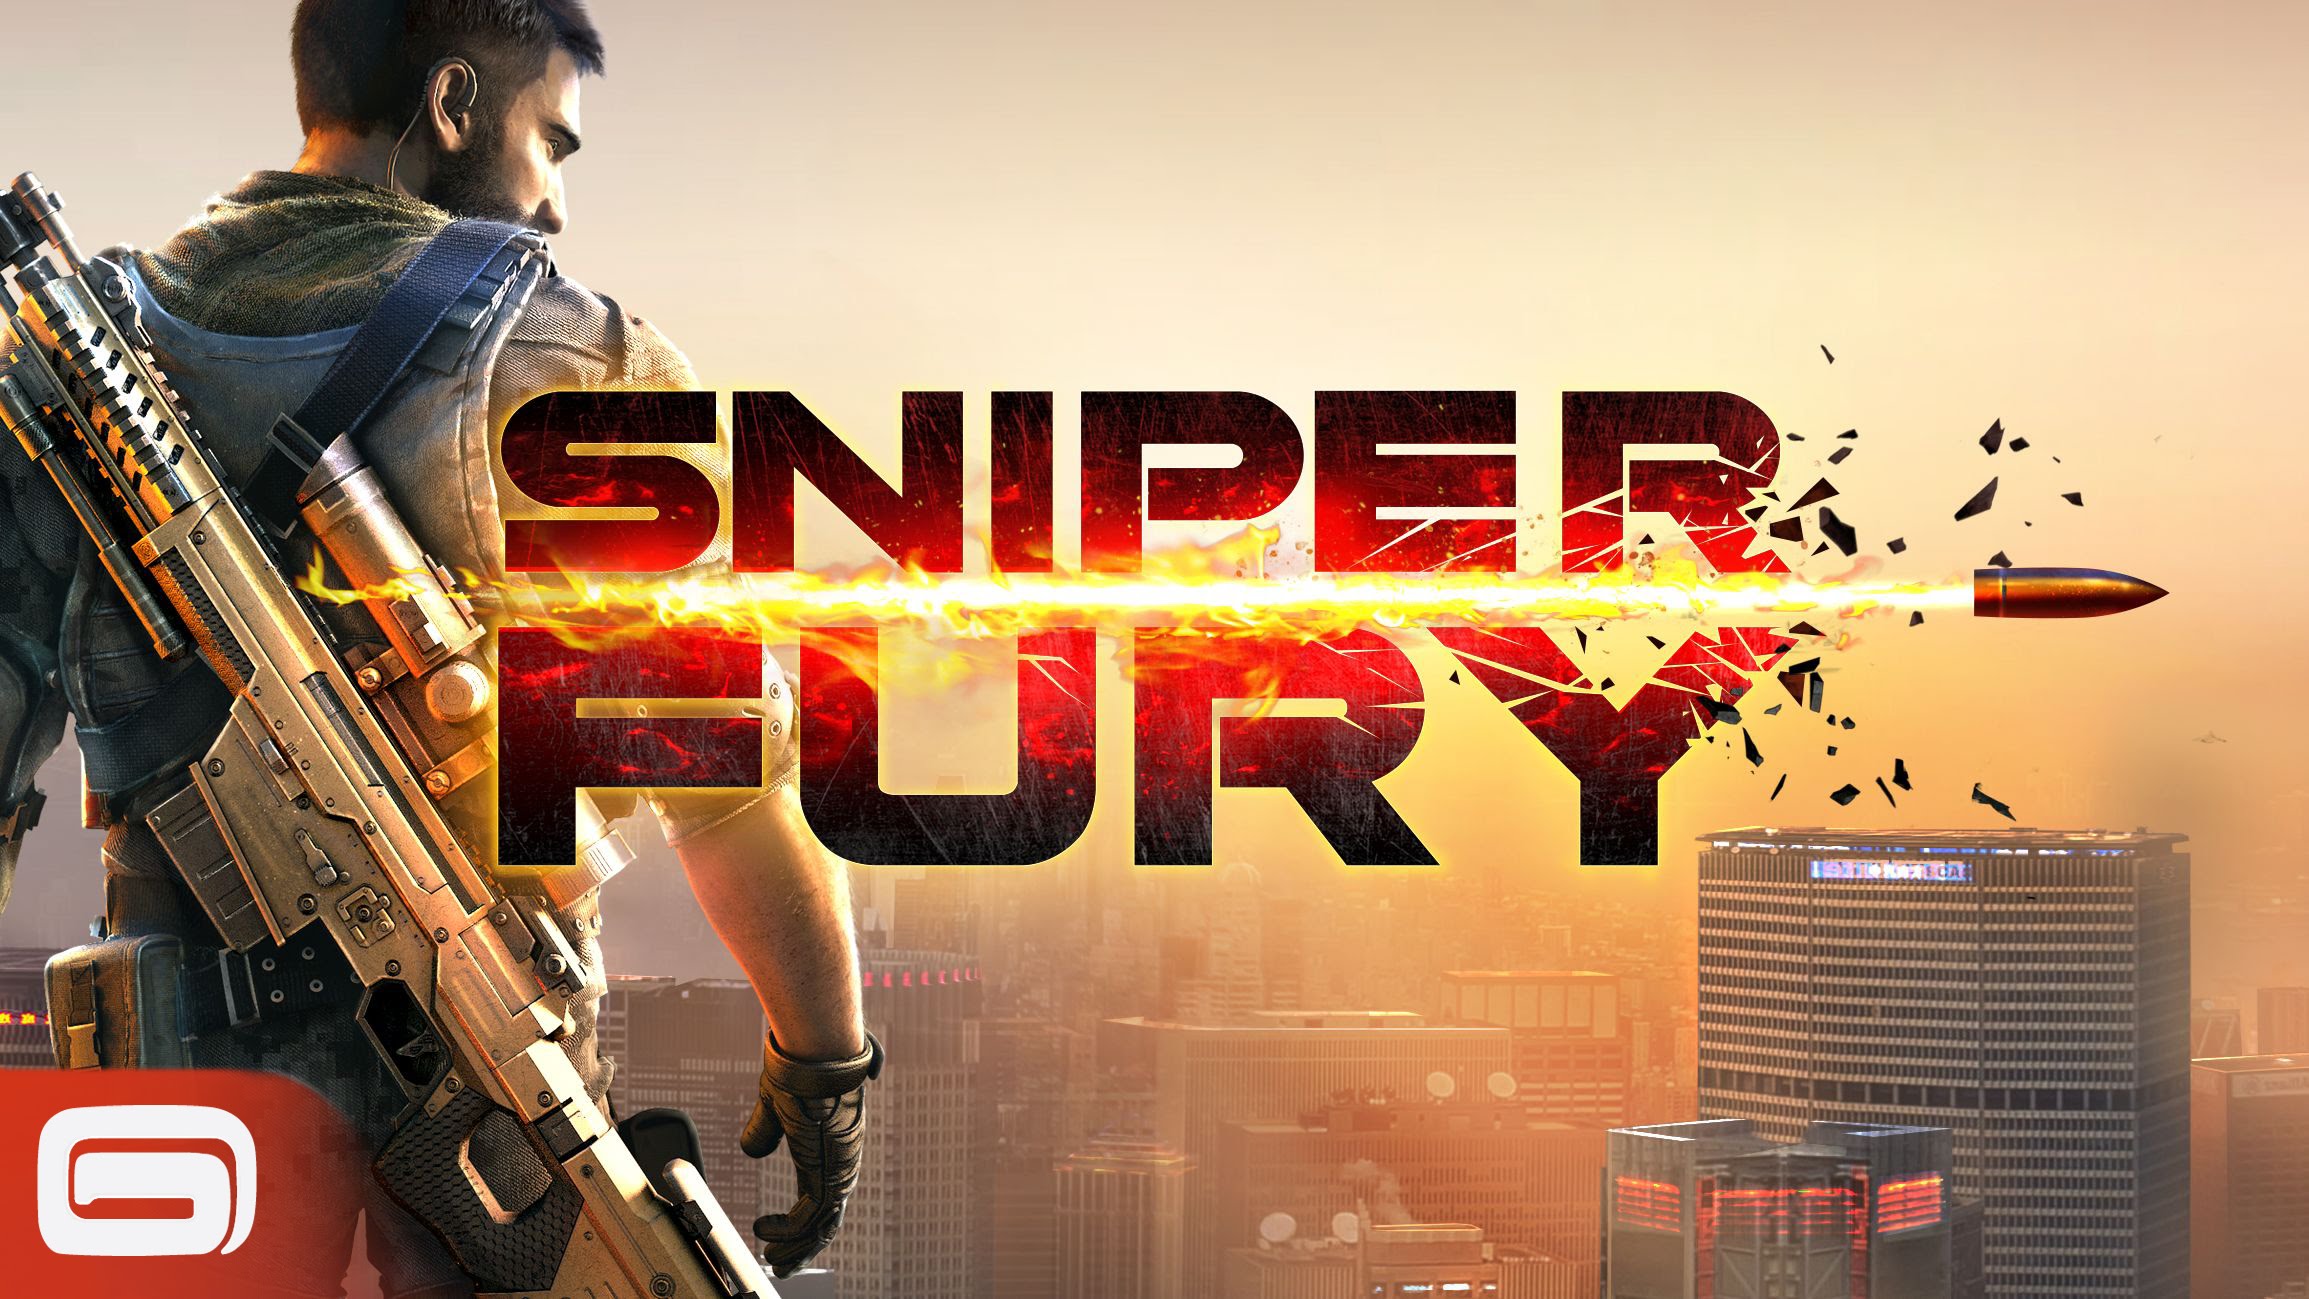 Sniper Fury gets updated with new features